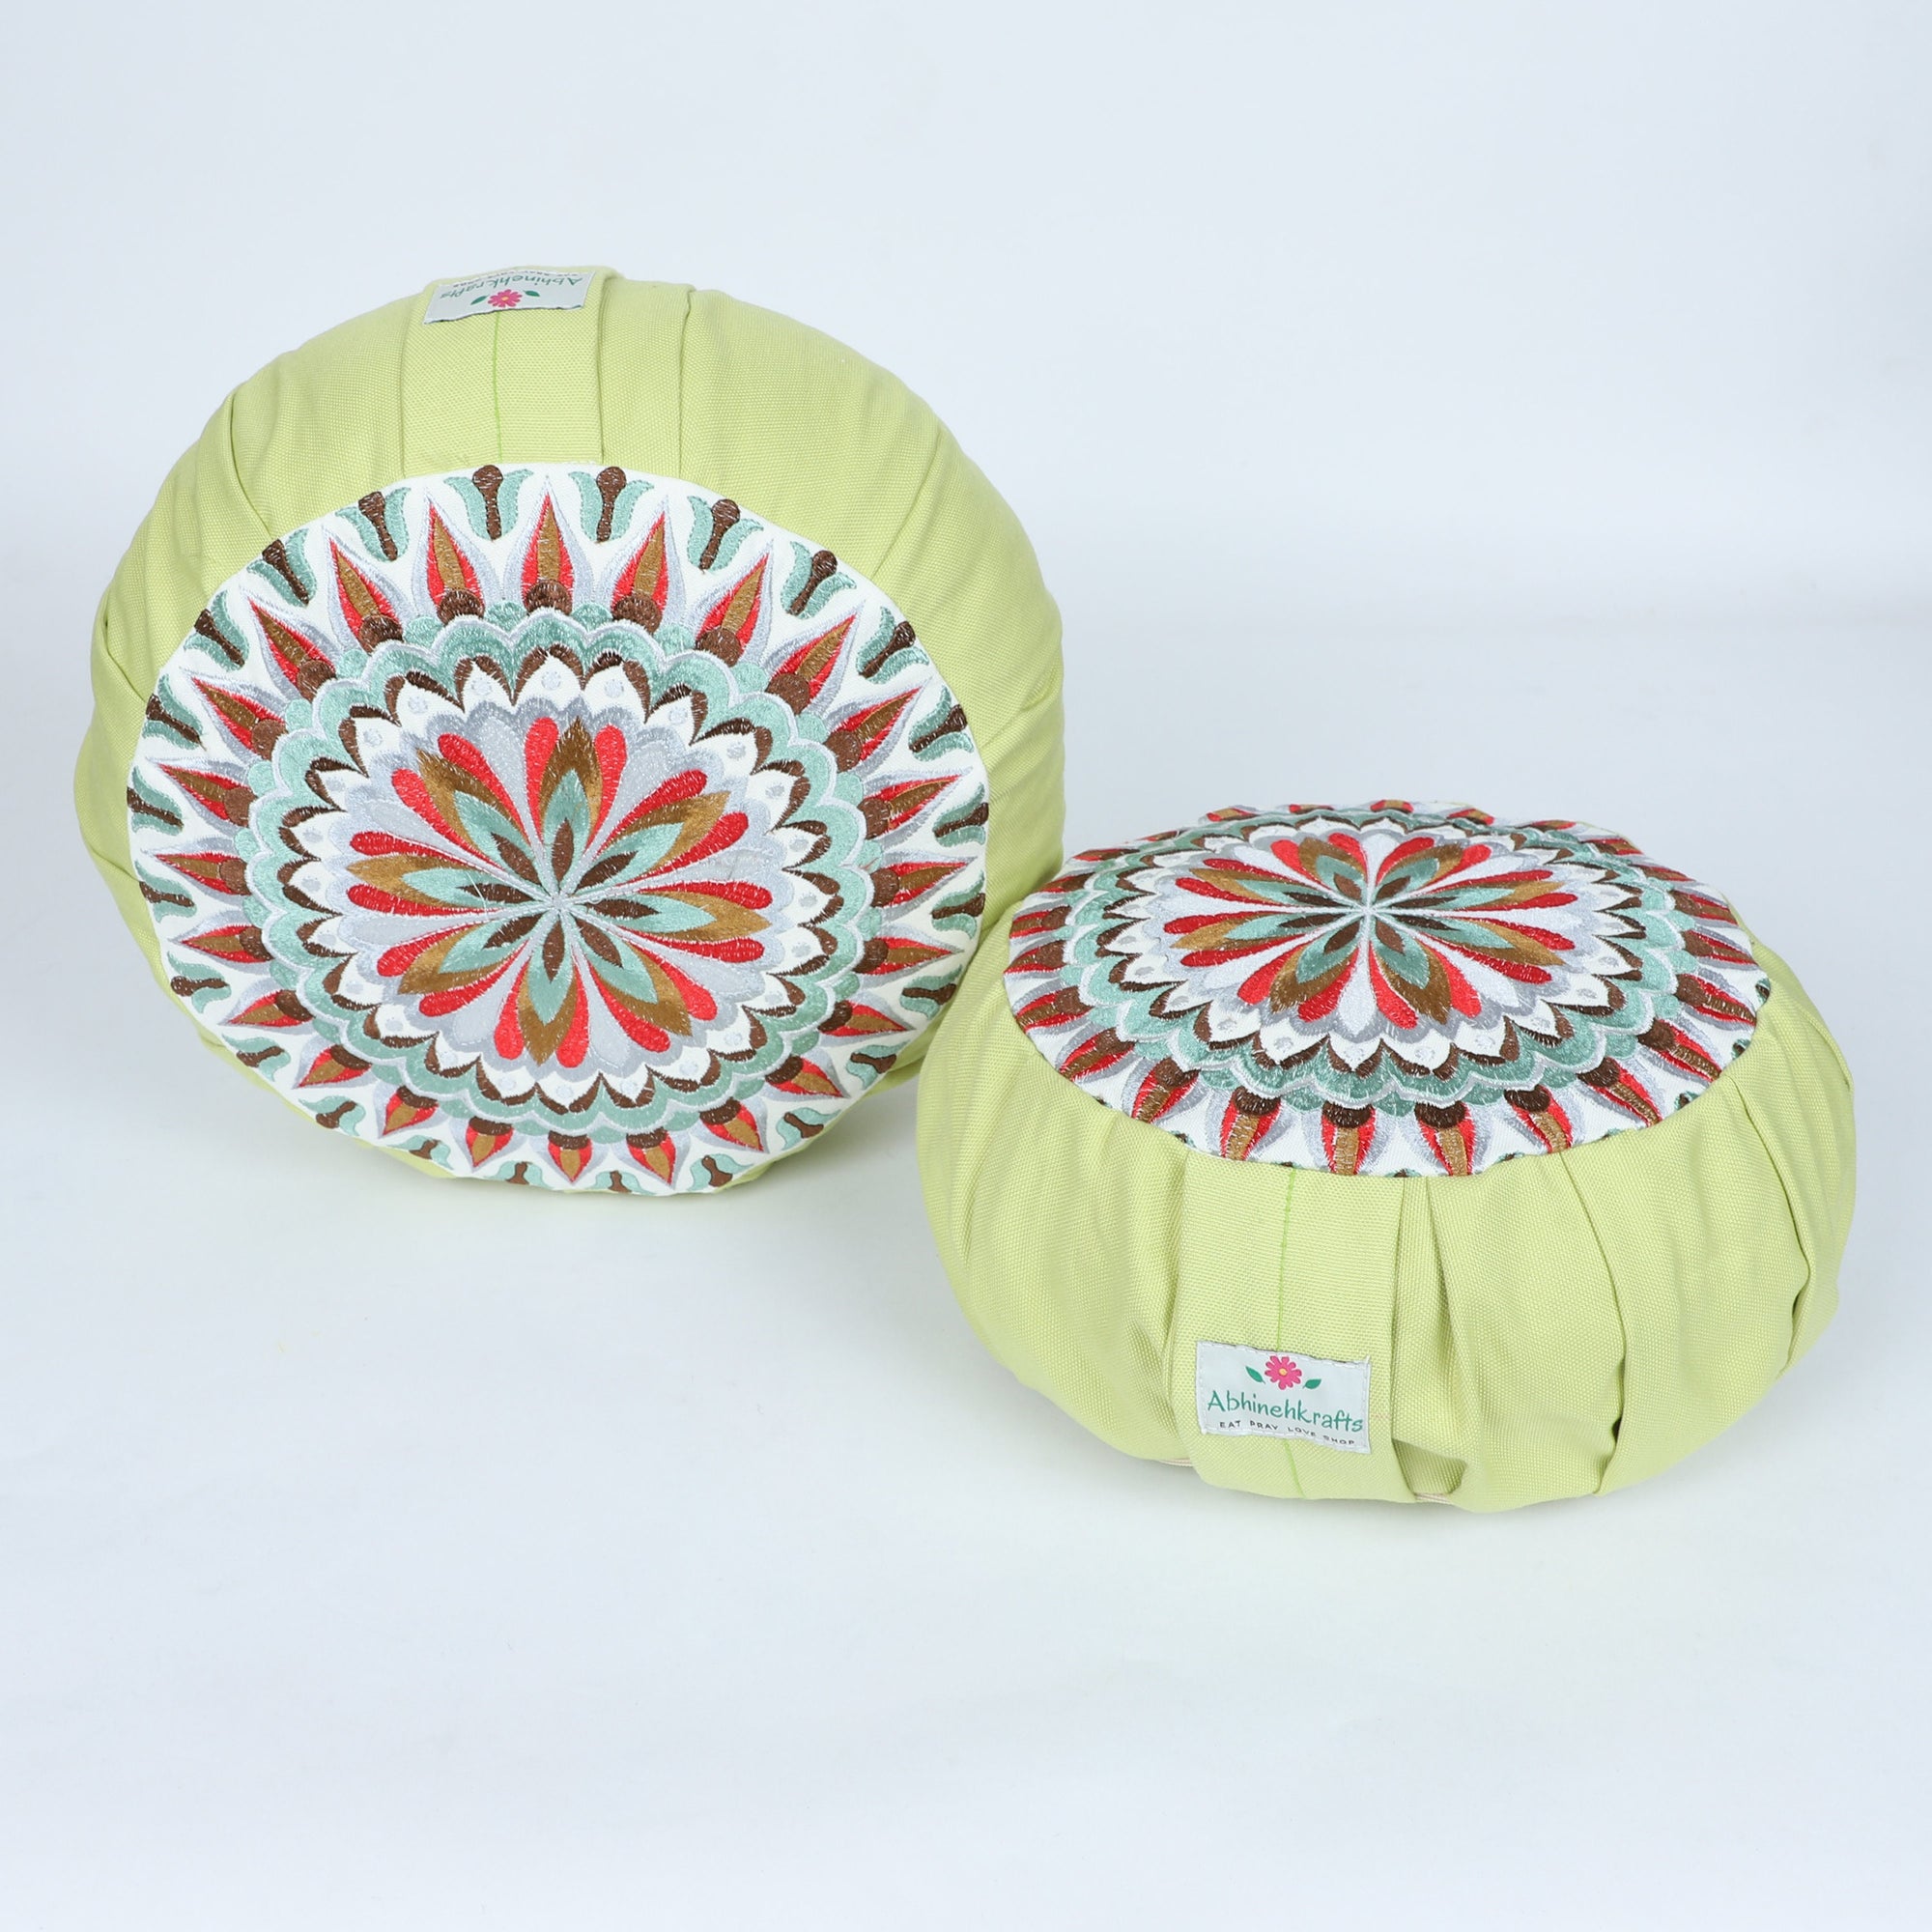 Embroidered Round Zafu Yoga Pillow |Zipped Cover |Washable| Portable - Jhelum (Red on Olive) - Size and Filling Options